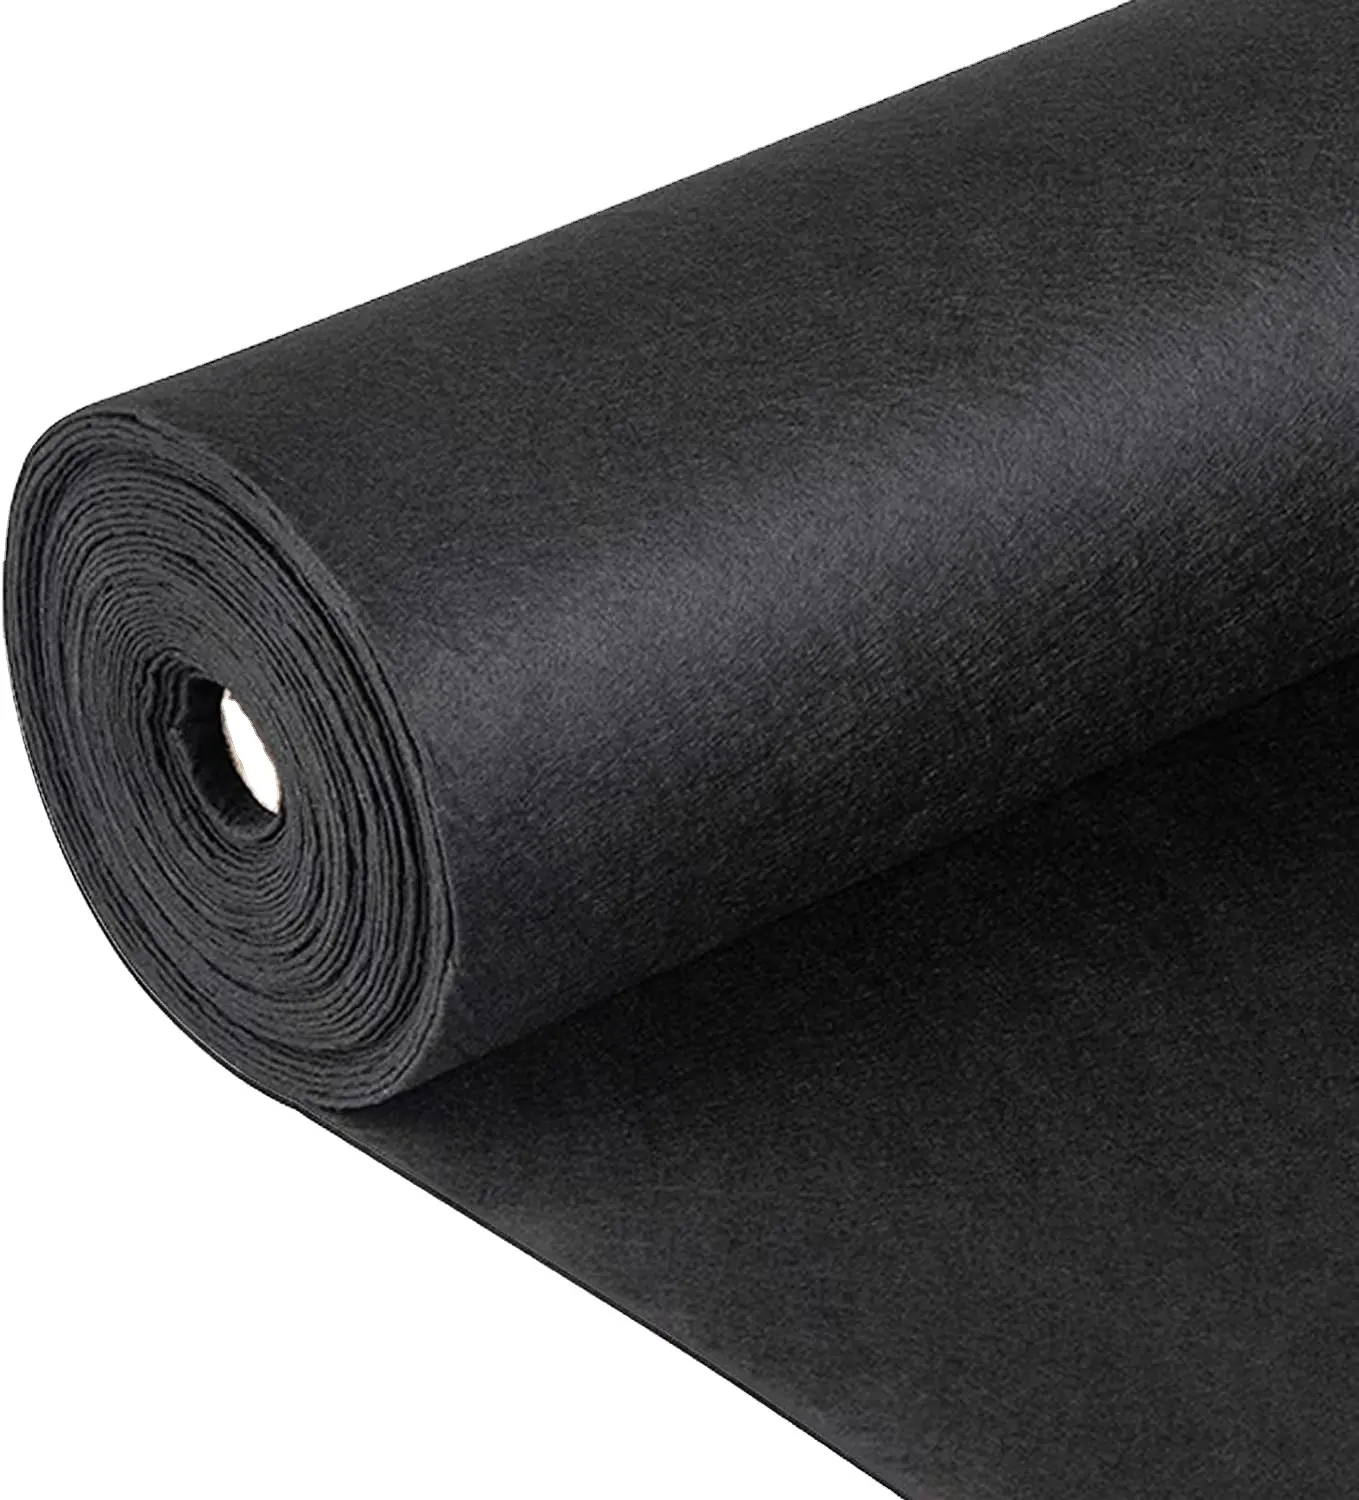 PP Stable Fiber Geotextile 200G/M2 300 G/M2 400G/M2 Nonwoven Fabric for Road bank protection